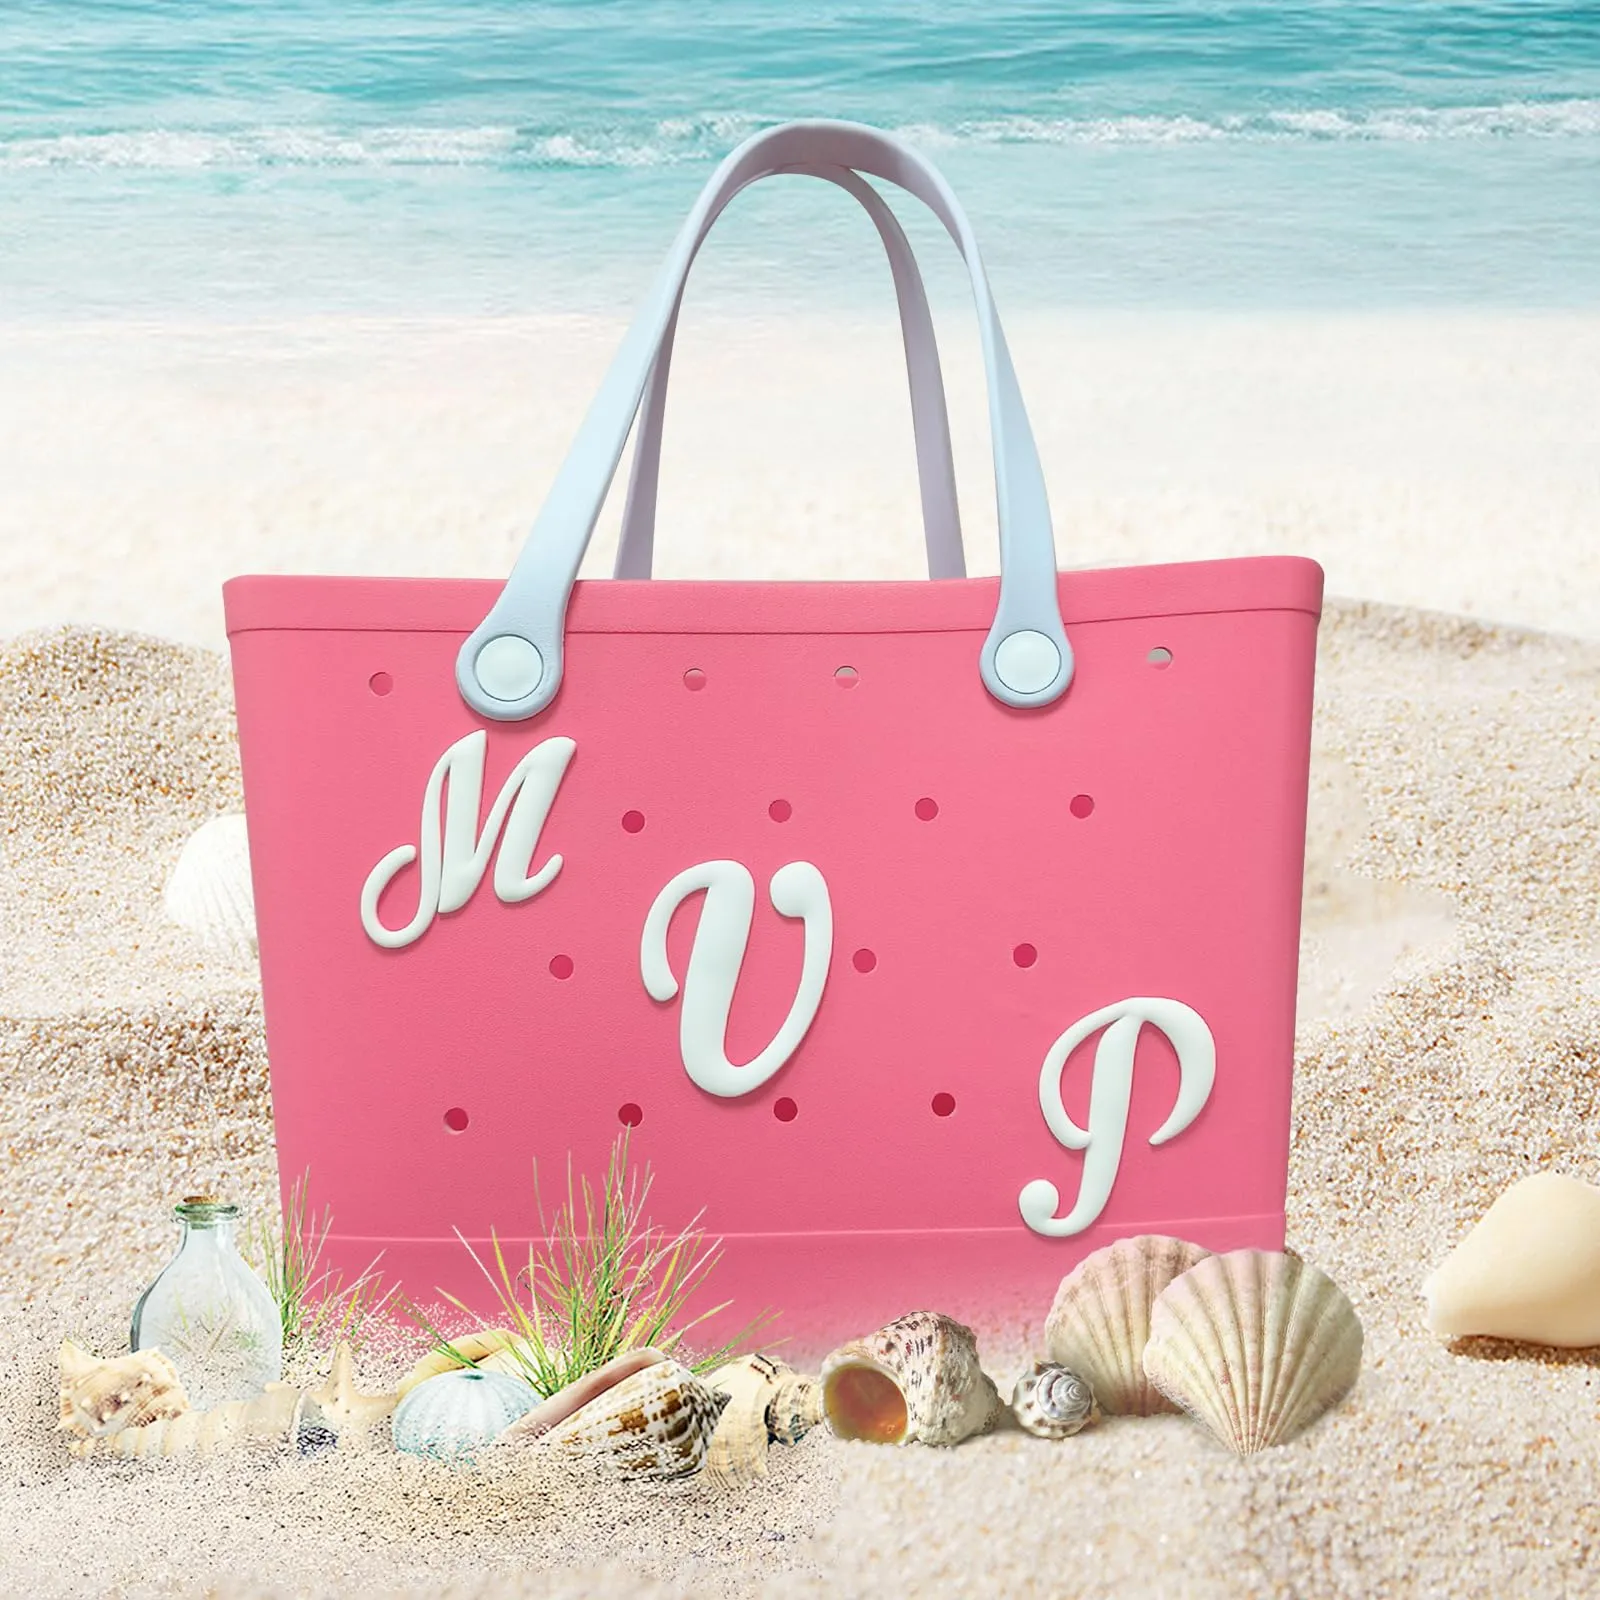 bag charms compatible with bogg bag accessories insert decorative alphabet lettering for bogg bag personalize your beach tote rubber beach bag accessories with alphabet letters k